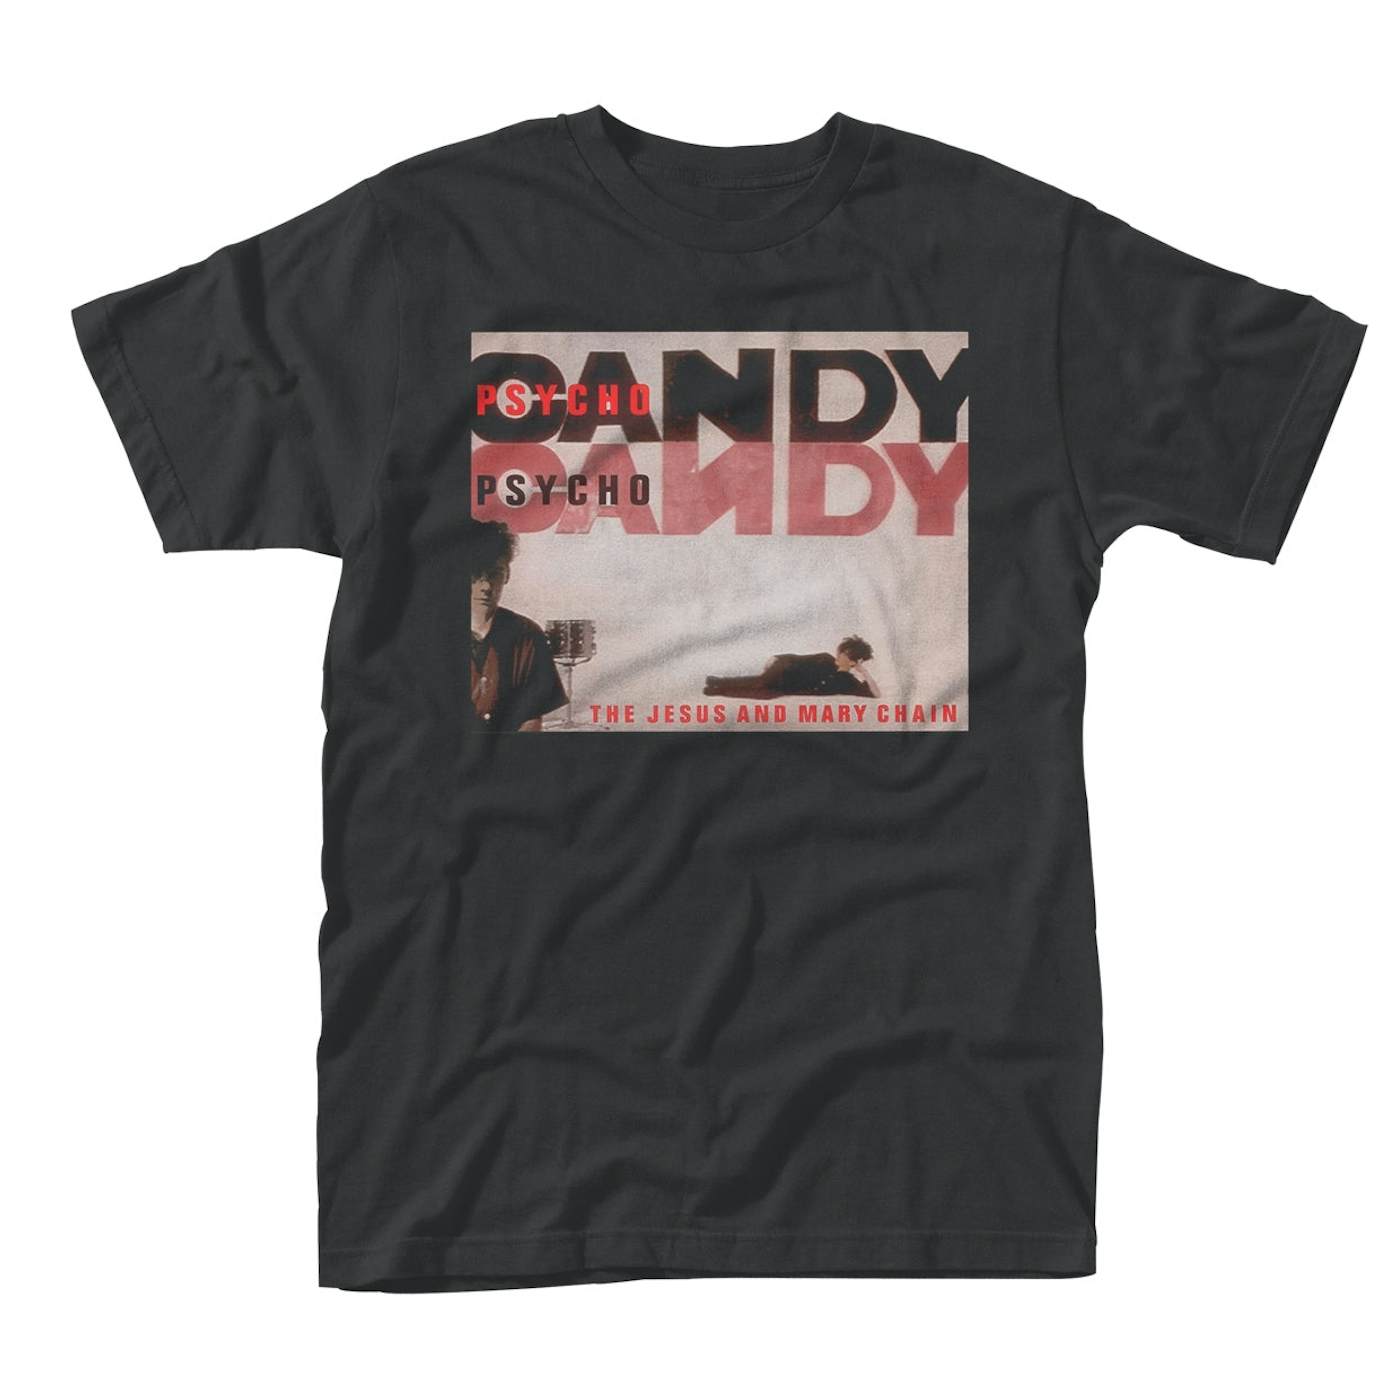 The Jesus And Mary Chain T Shirt - Psychocandy